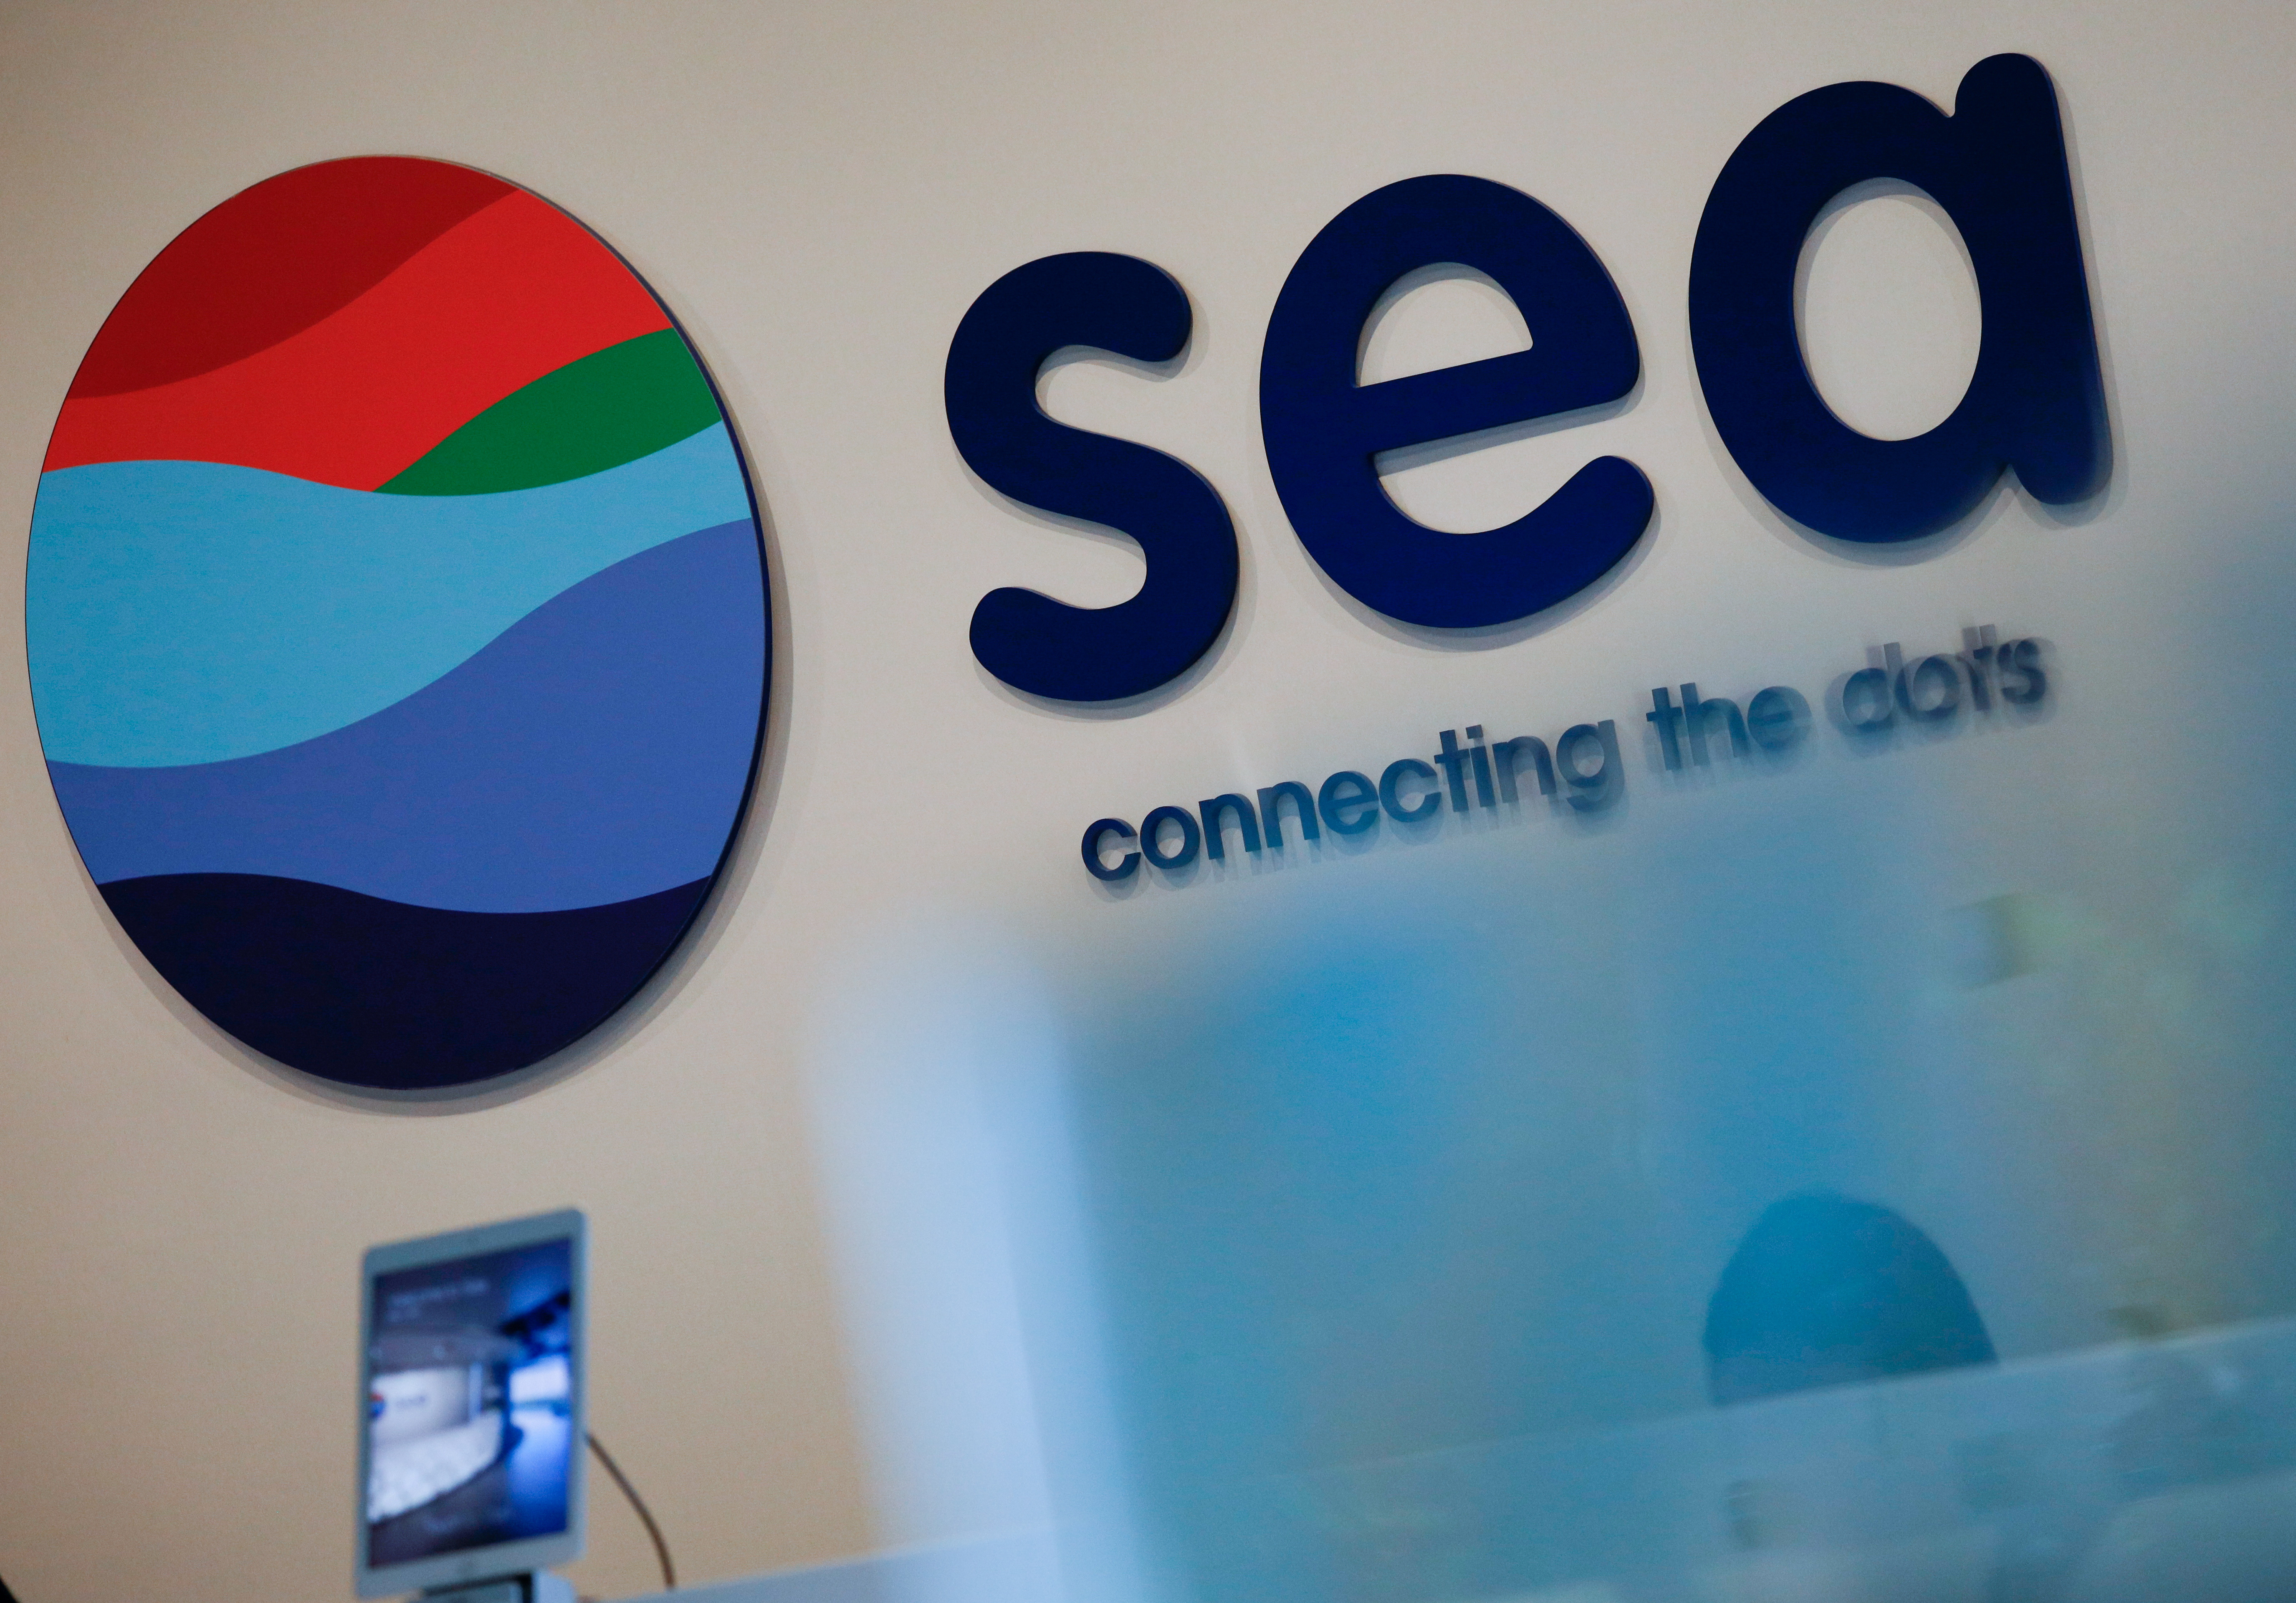 Sea Ltd's sign is pictured at its office in Singapore